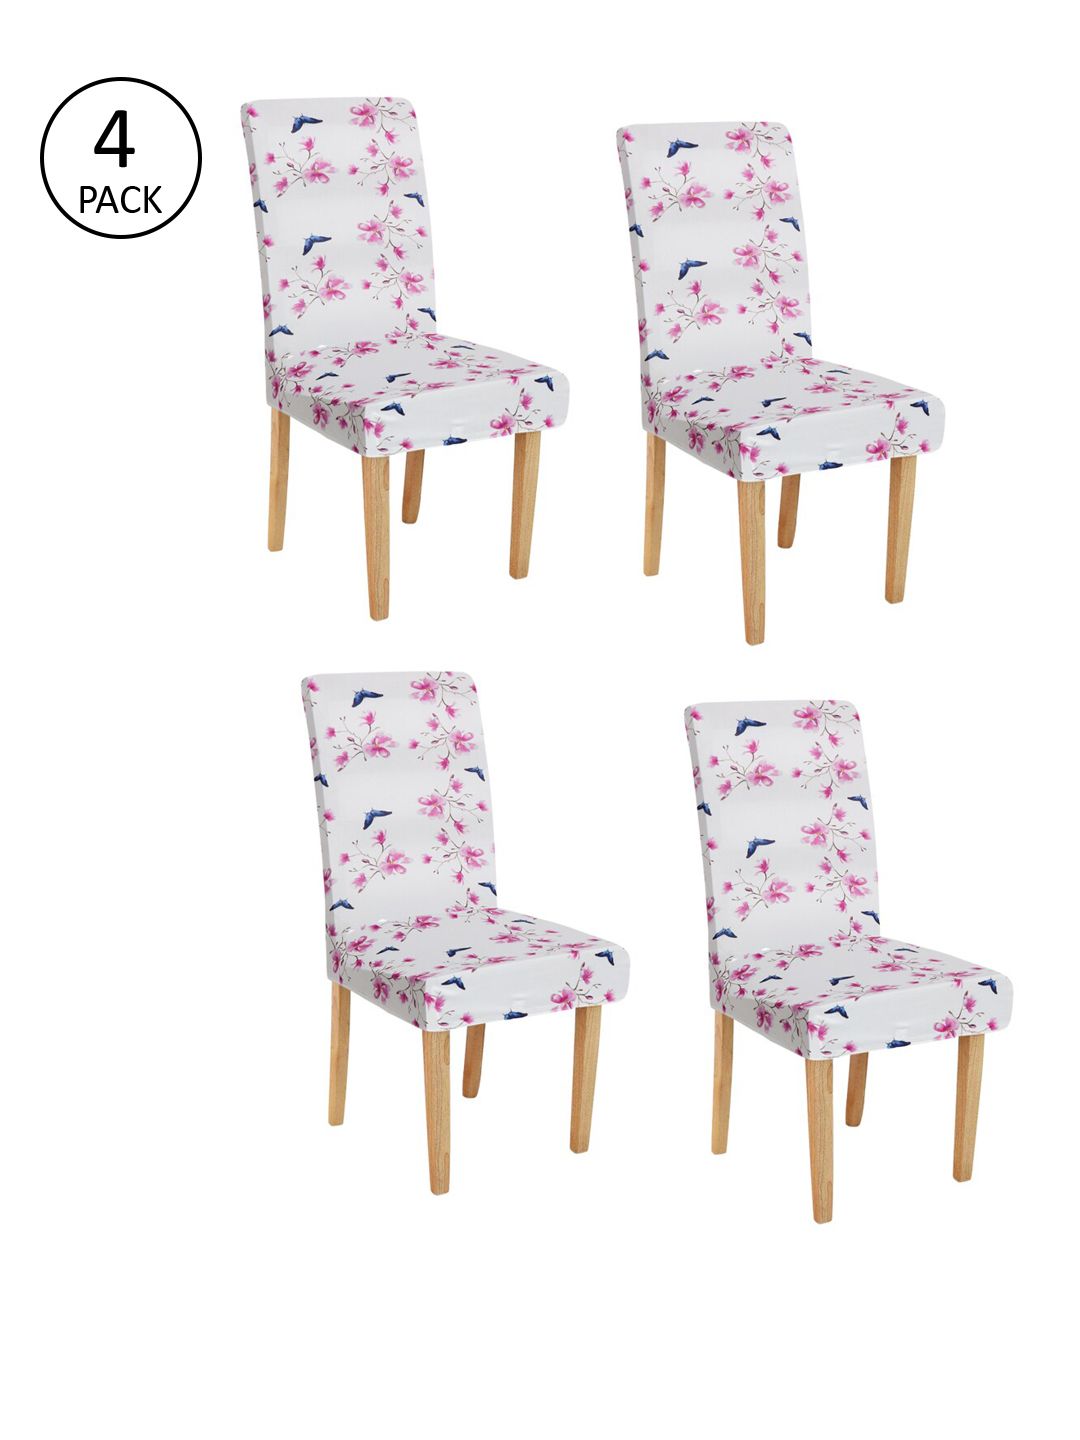 Rajasthan Decor Set Of 4 Cream-Coloured & Pink Printed Chair Covers Price in India